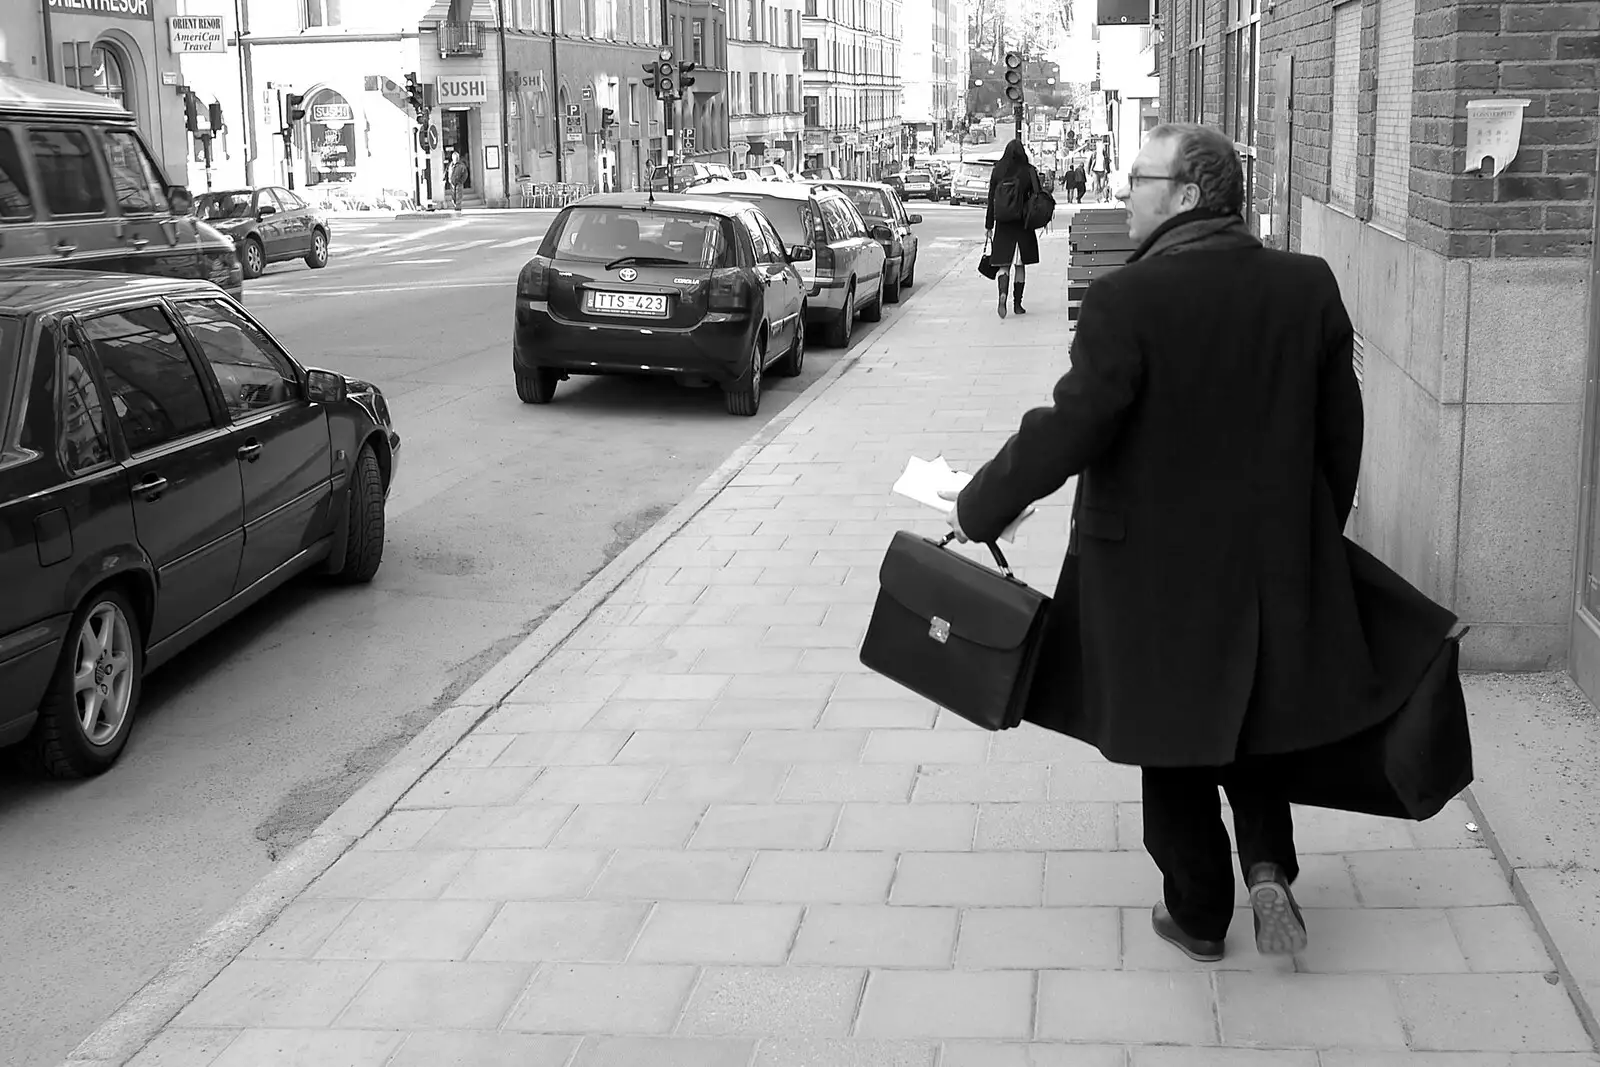 Julian with his bags, from A Postcard From Stockholm: A Working Trip to Sweden - 24th April 2005